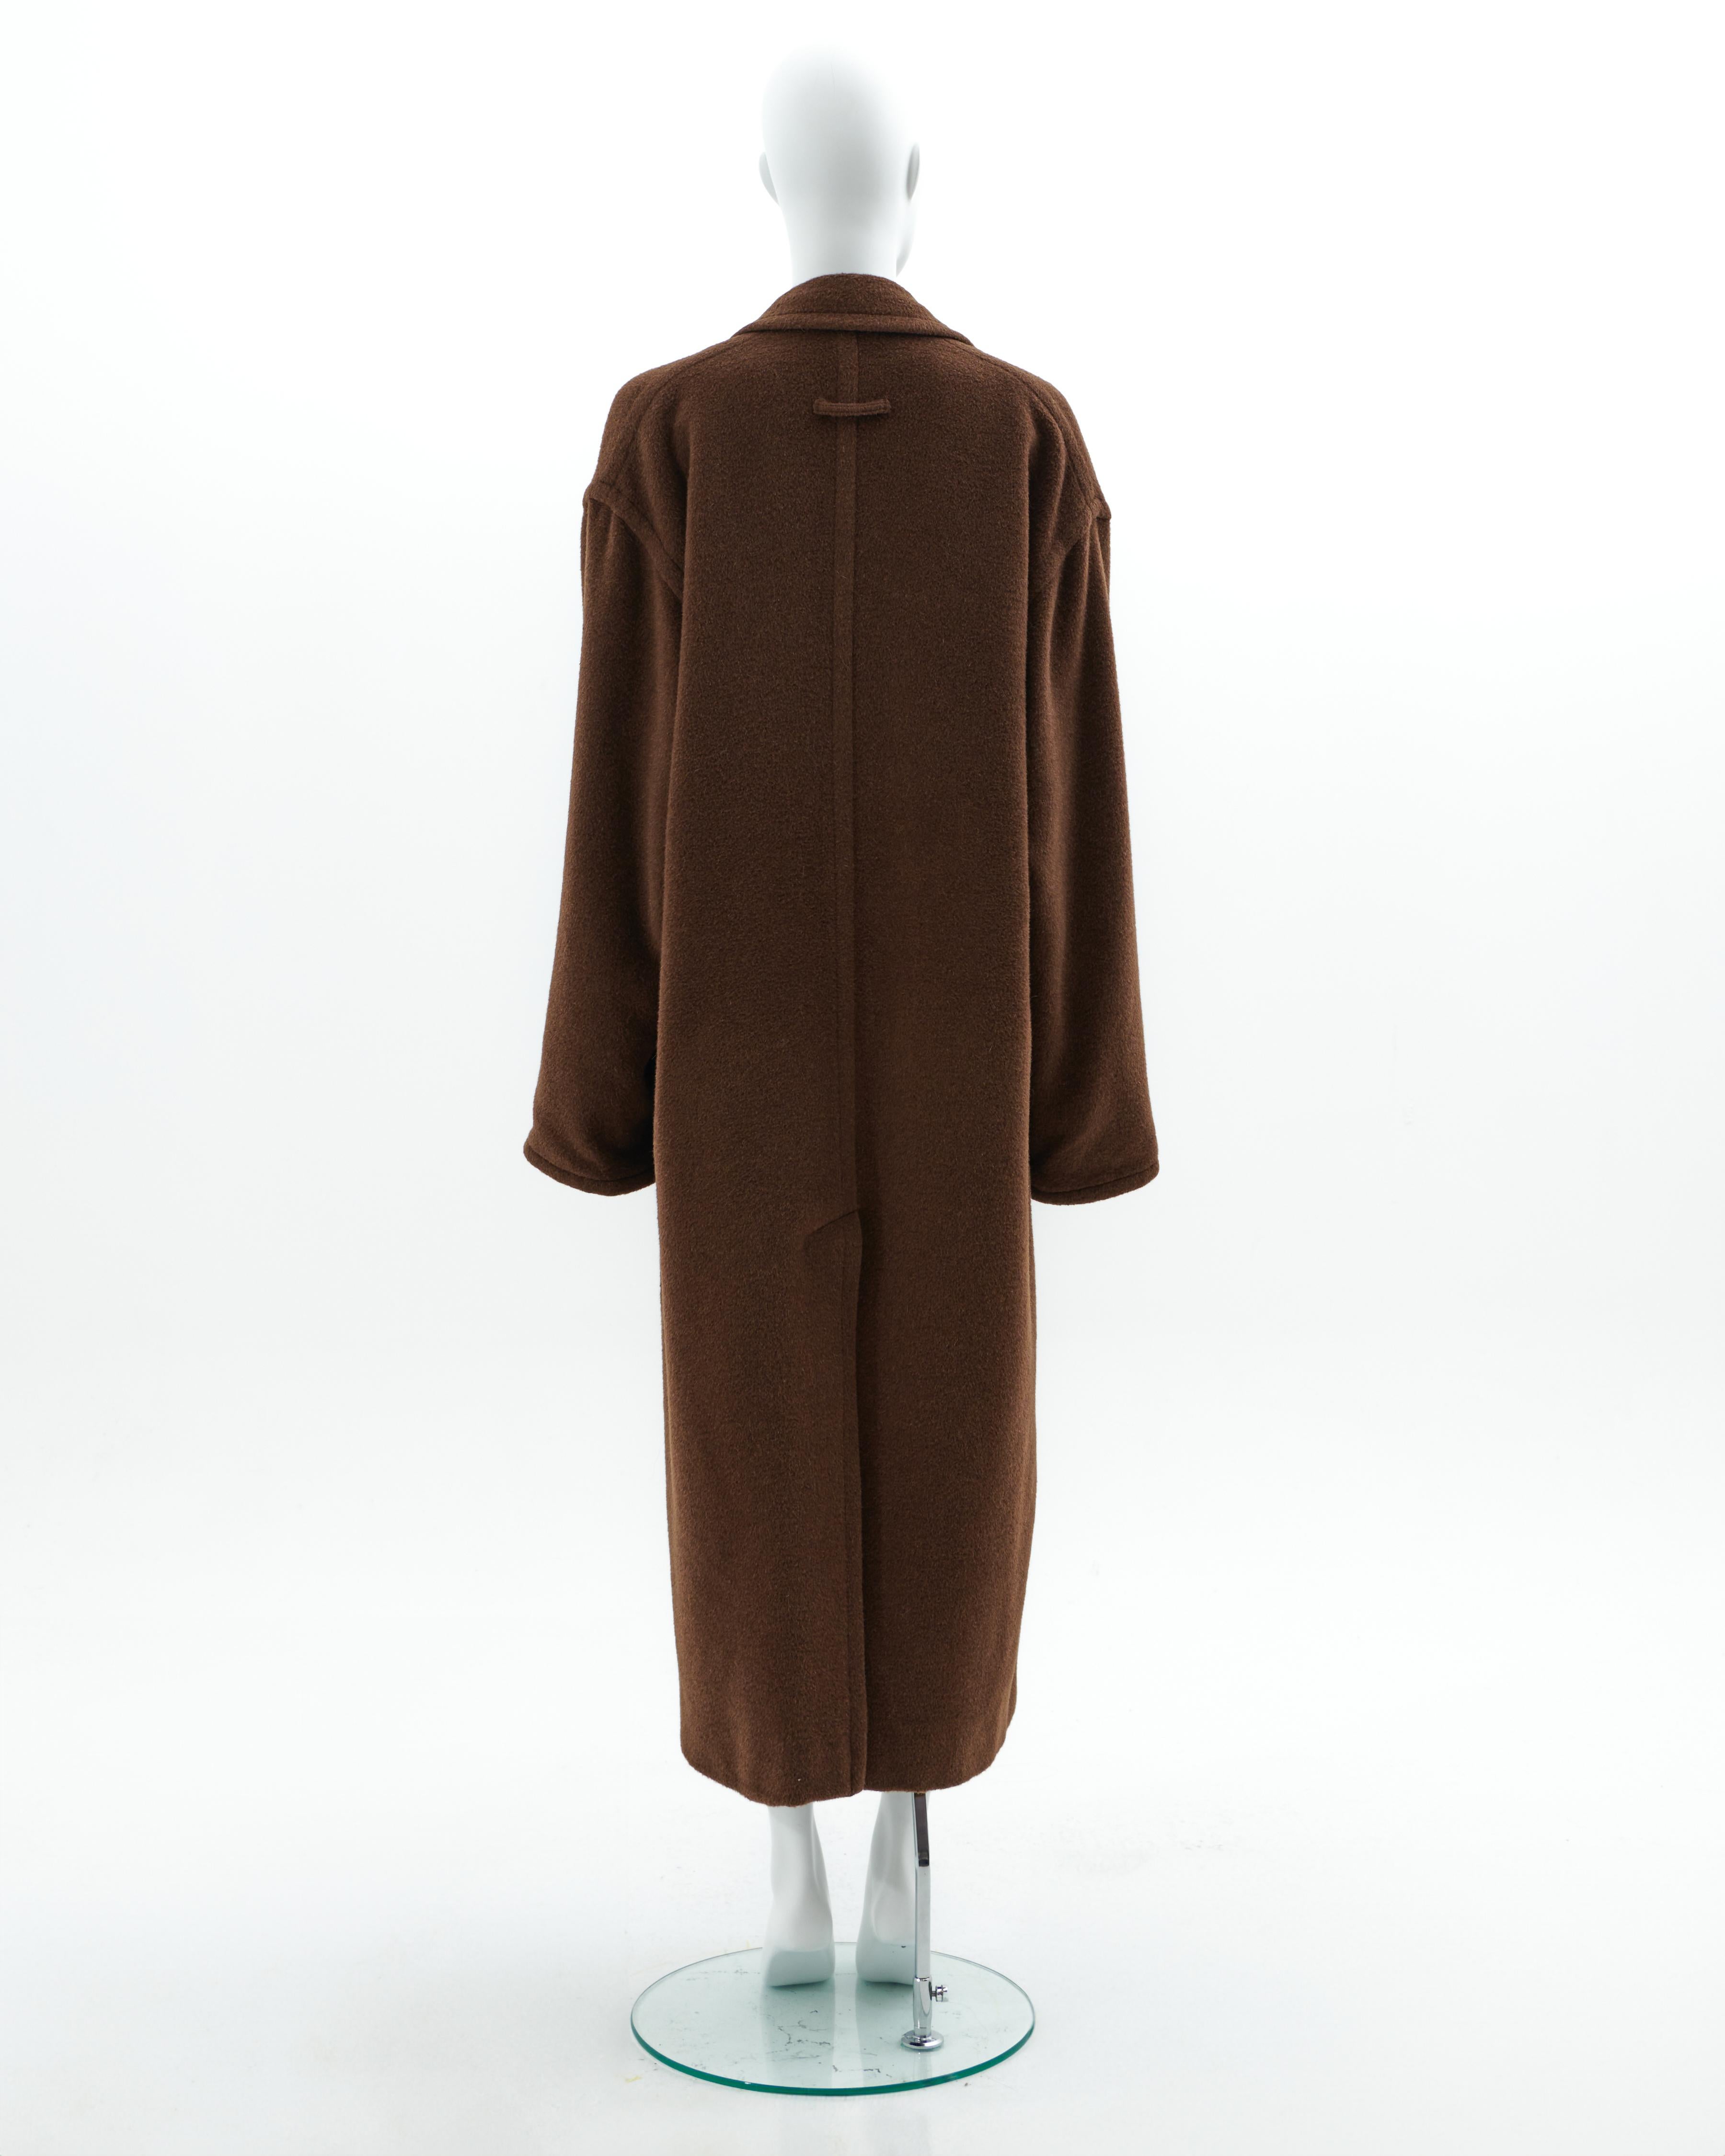 Jean Paul Gaultier F/W 1994 'Le Grand Voyage' Caramel wool coat In Excellent Condition For Sale In Milano, IT